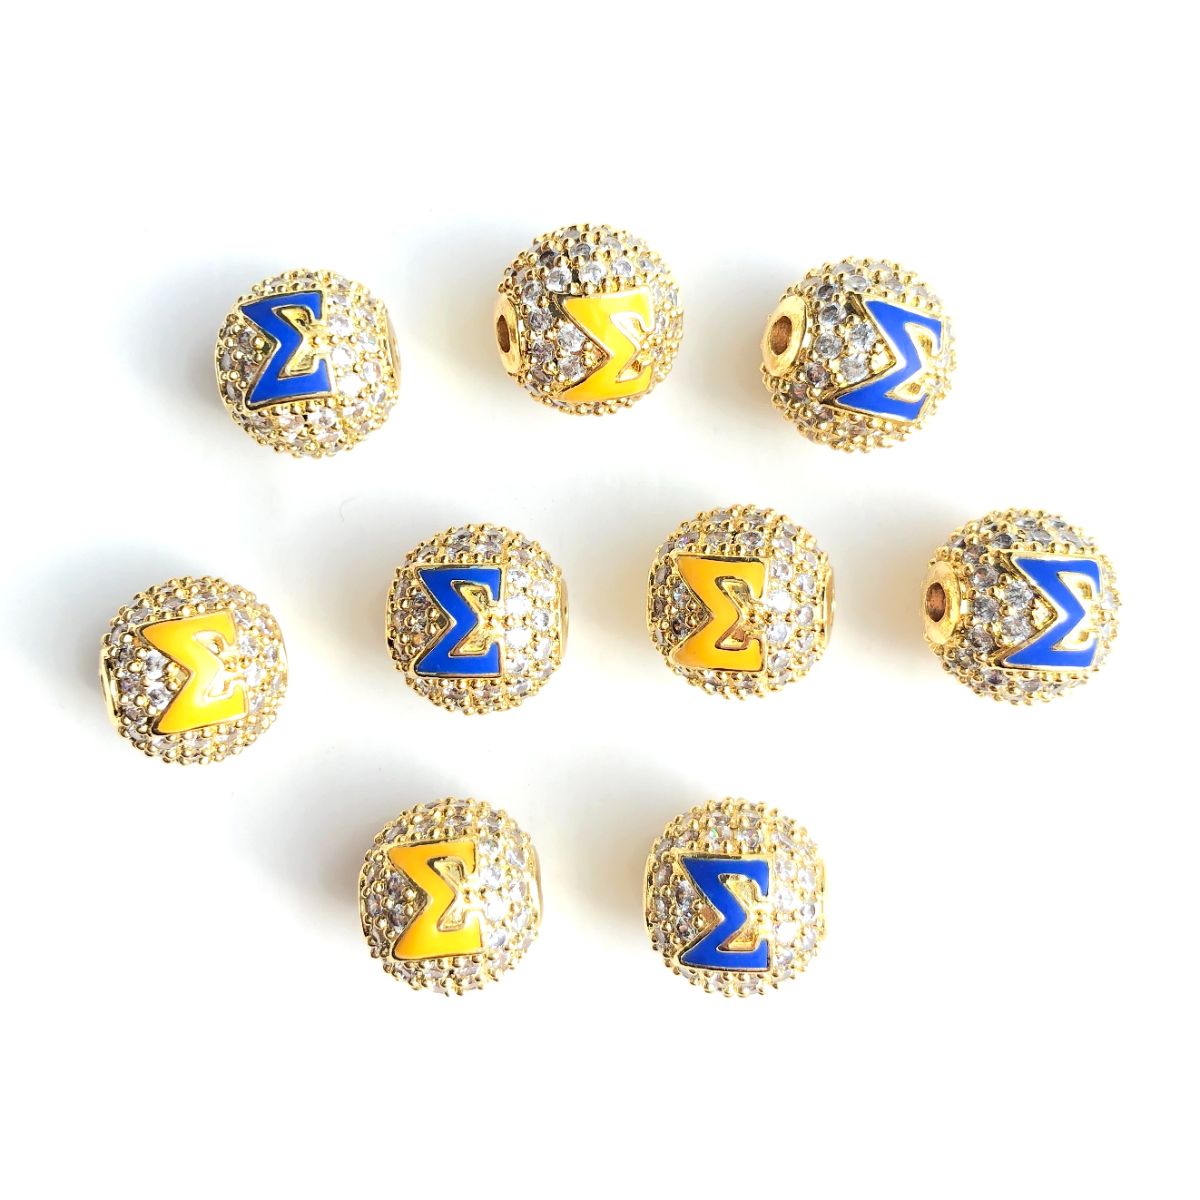 12pcs/lot 10mm Blue Yellow Enamel CZ Paved Greek Letter "Σ", "Γ", "Ρ" Ball Spacers Beads 12 Gold Σ CZ Paved Spacers 10mm Beads Ball Beads Greek Letters New Spacers Arrivals Charms Beads Beyond